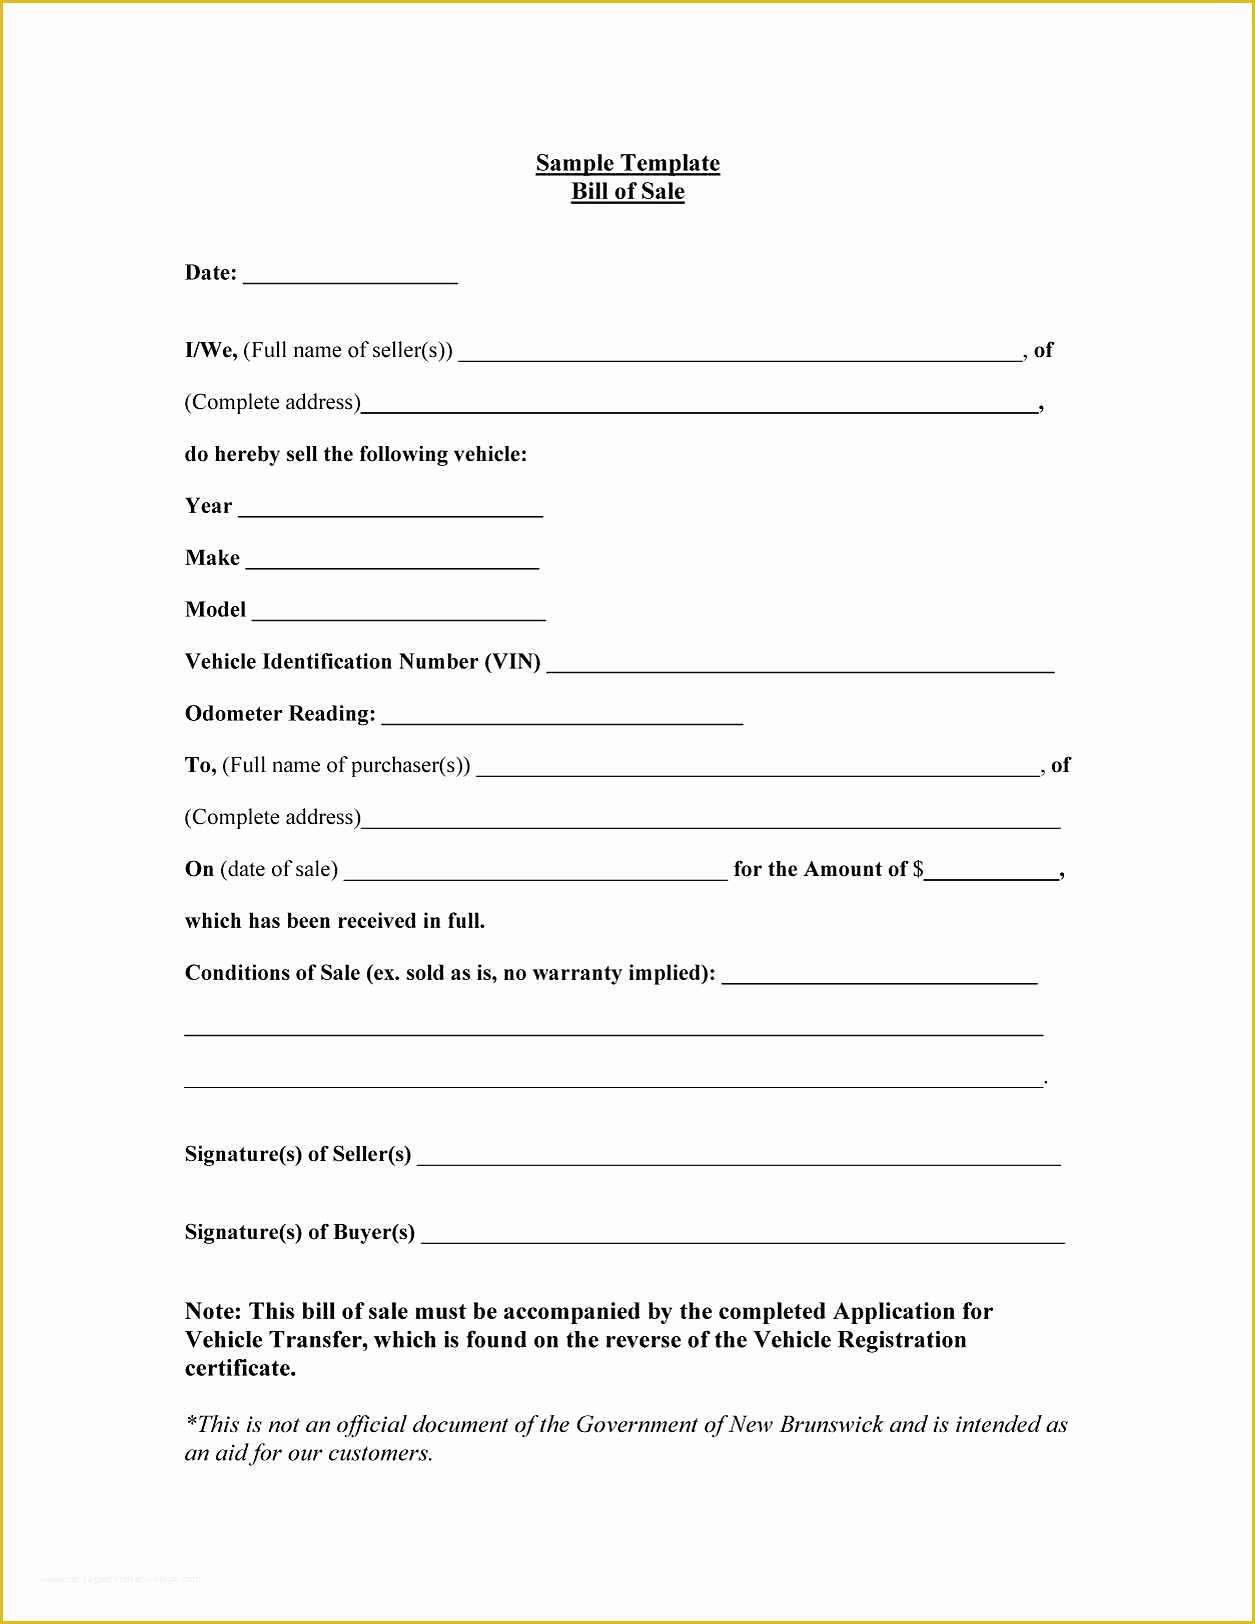 Free Bill Of Sale Template for Car Of Bill Sale Sample Document Mughals